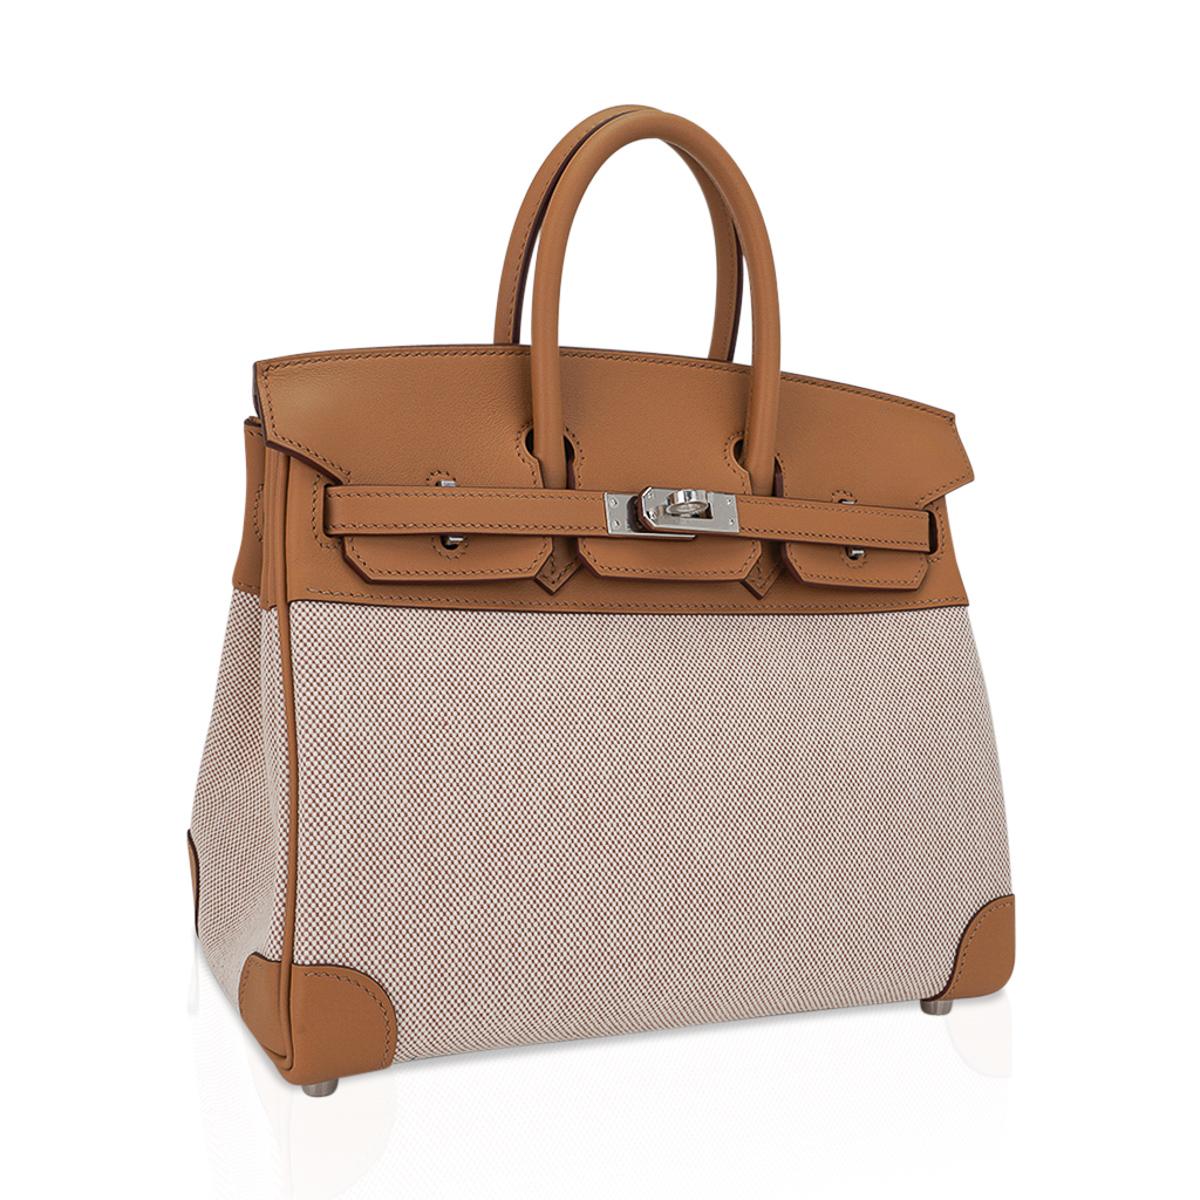 Mightychic offers a limited edition Hermes Birkin 25 bag featured in coveted Toile H in beige and ecru with Biscuit Swift leather.
This prized Toile Birkin in a 25 is virtually impossible to find, and true collectors treasure.
Rich neutral Hermes